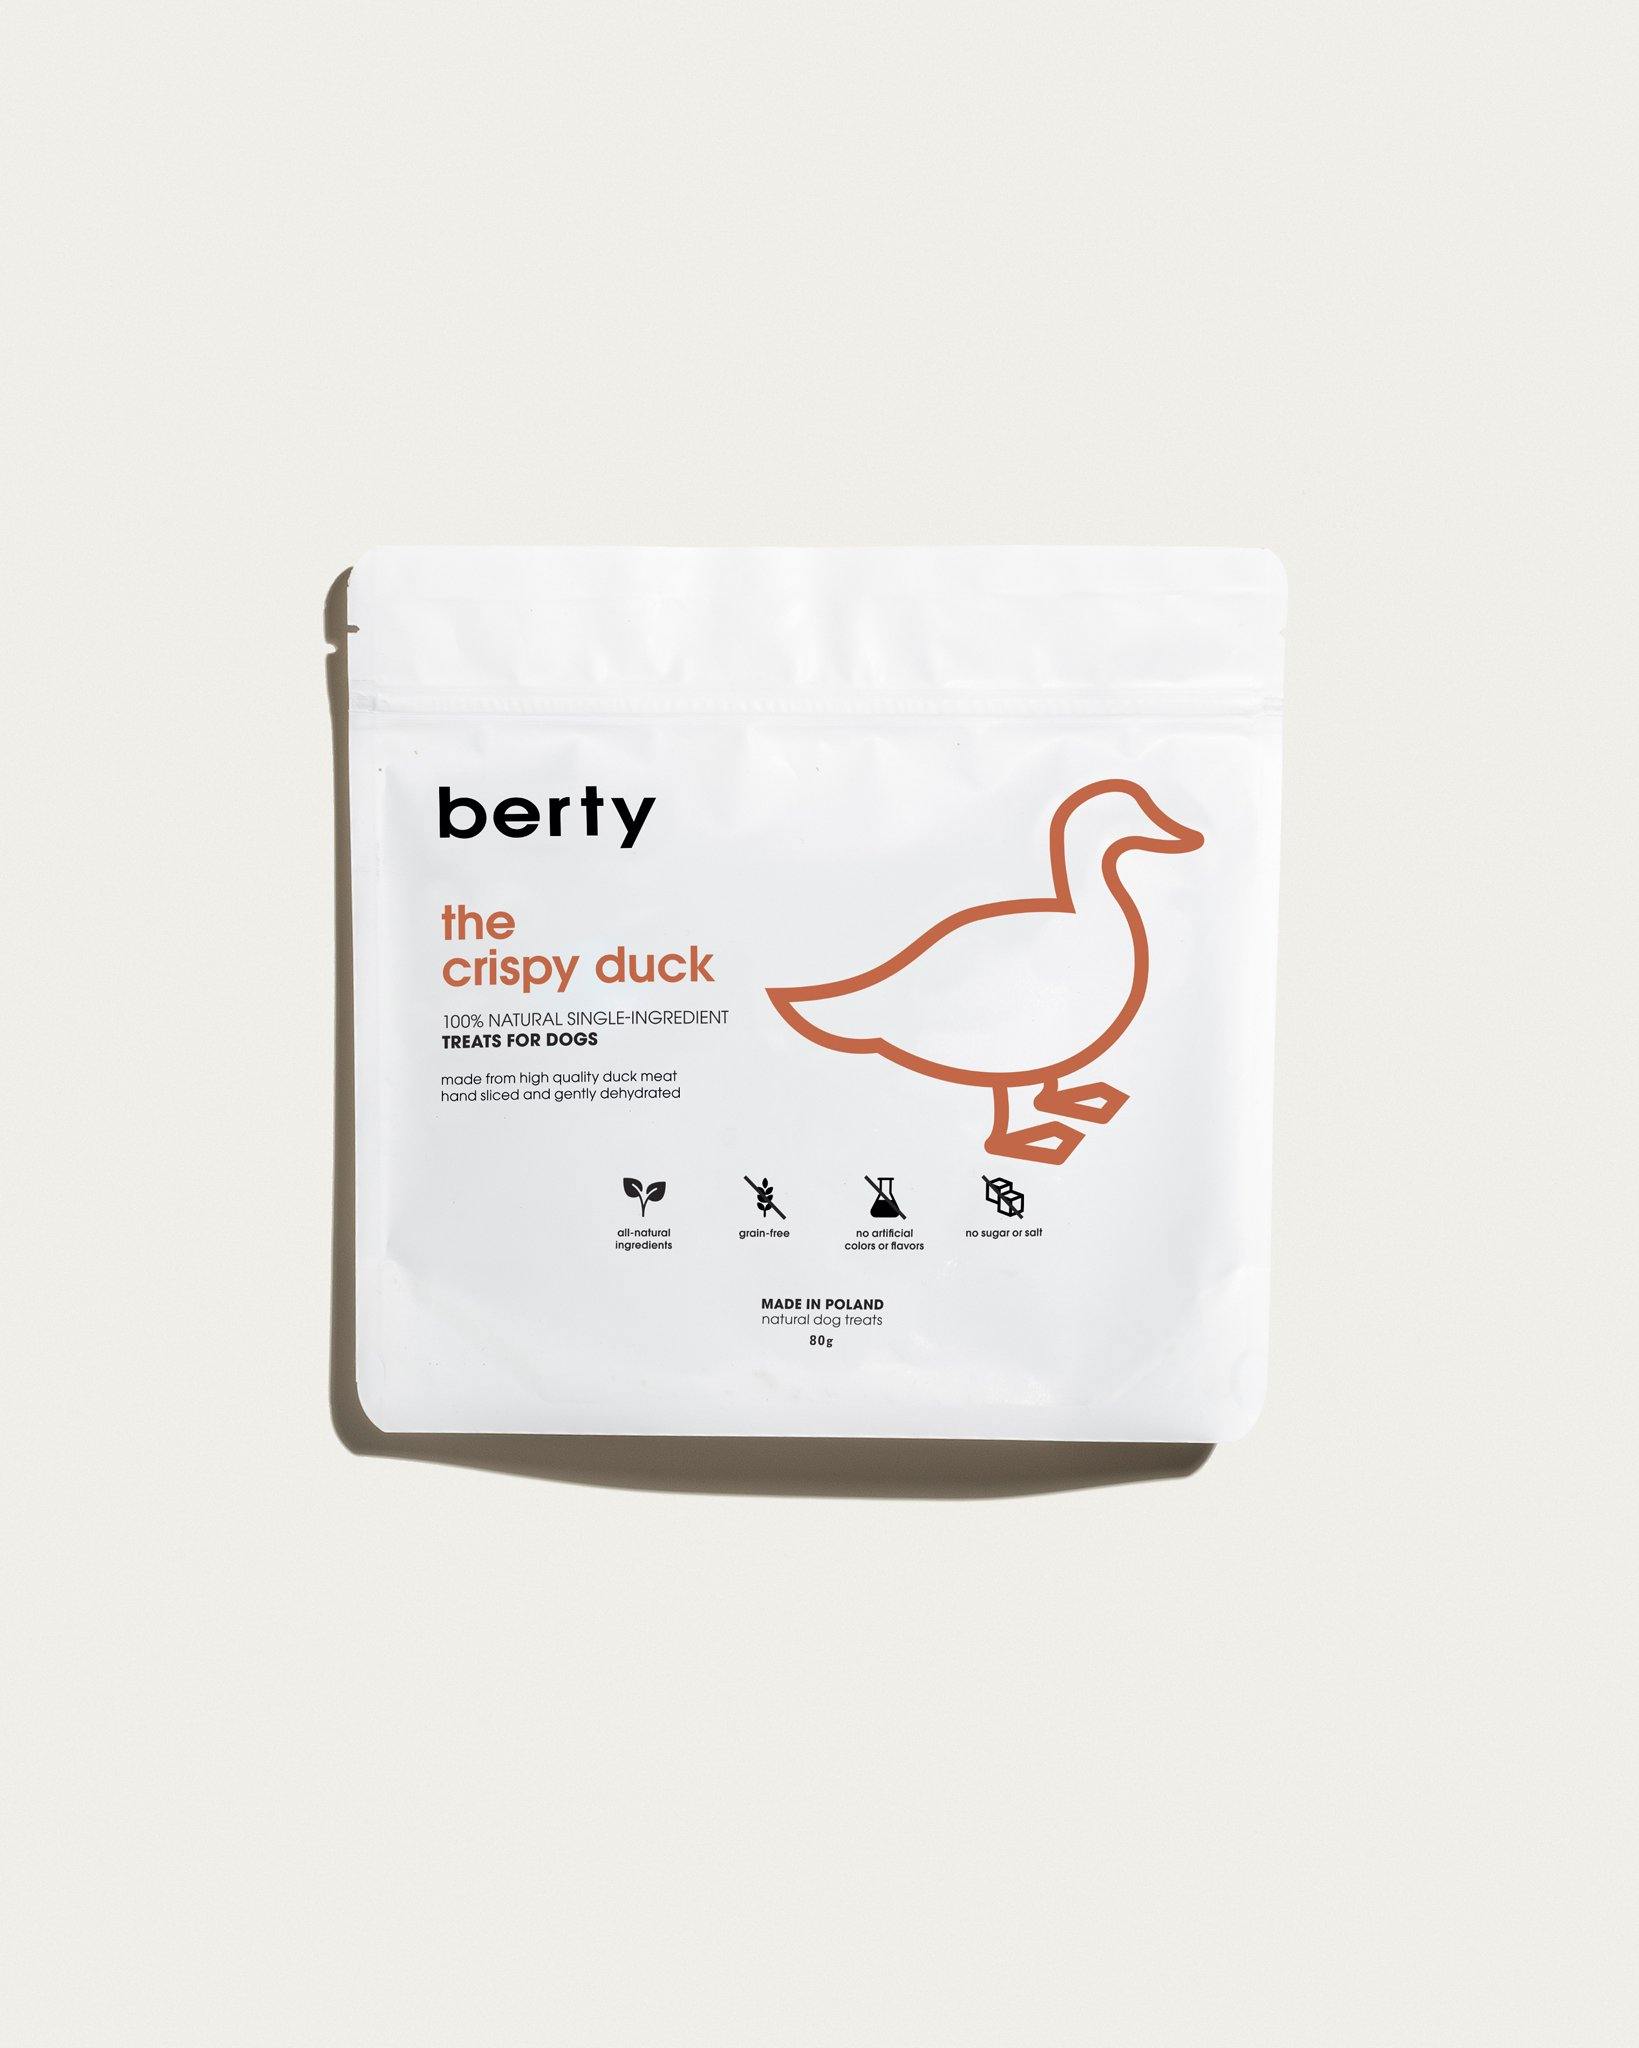 the crispy duck - treats for dogs - berty